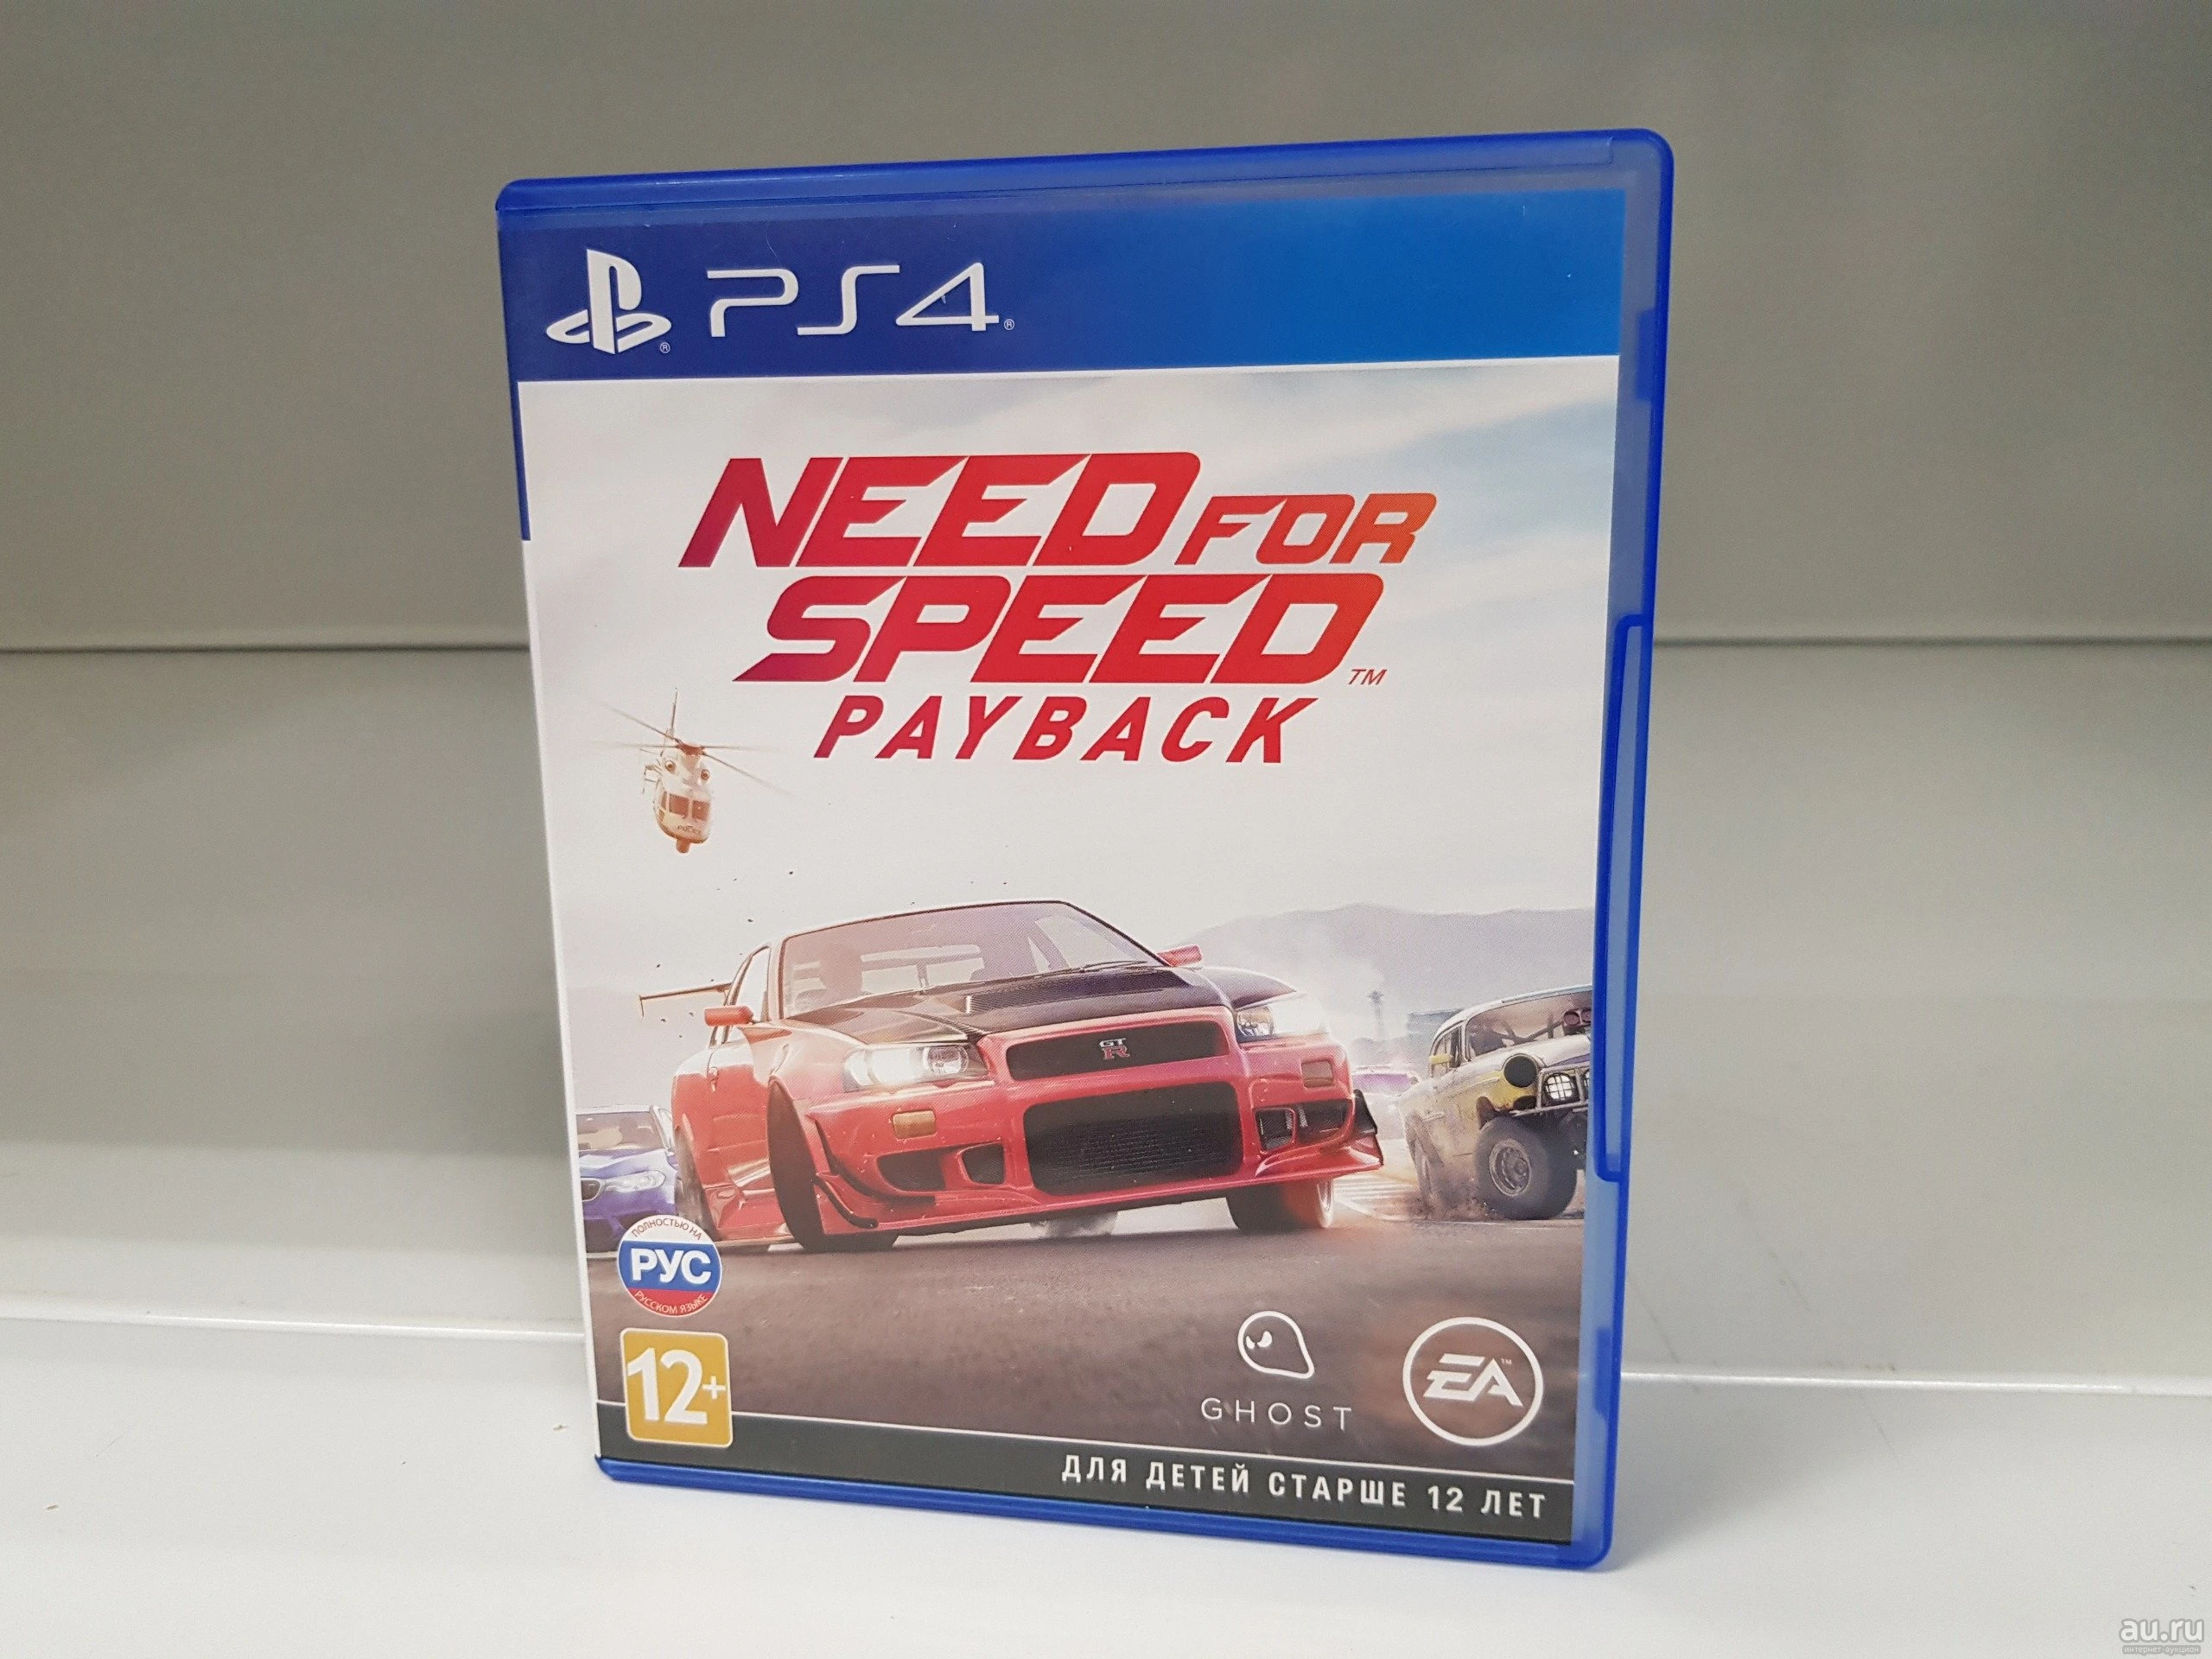 Need for Speed Payback пс4. NFS Payback ps4 диск. Need for Speed диск на ПС 4. Need for Speed Payback (ps4).